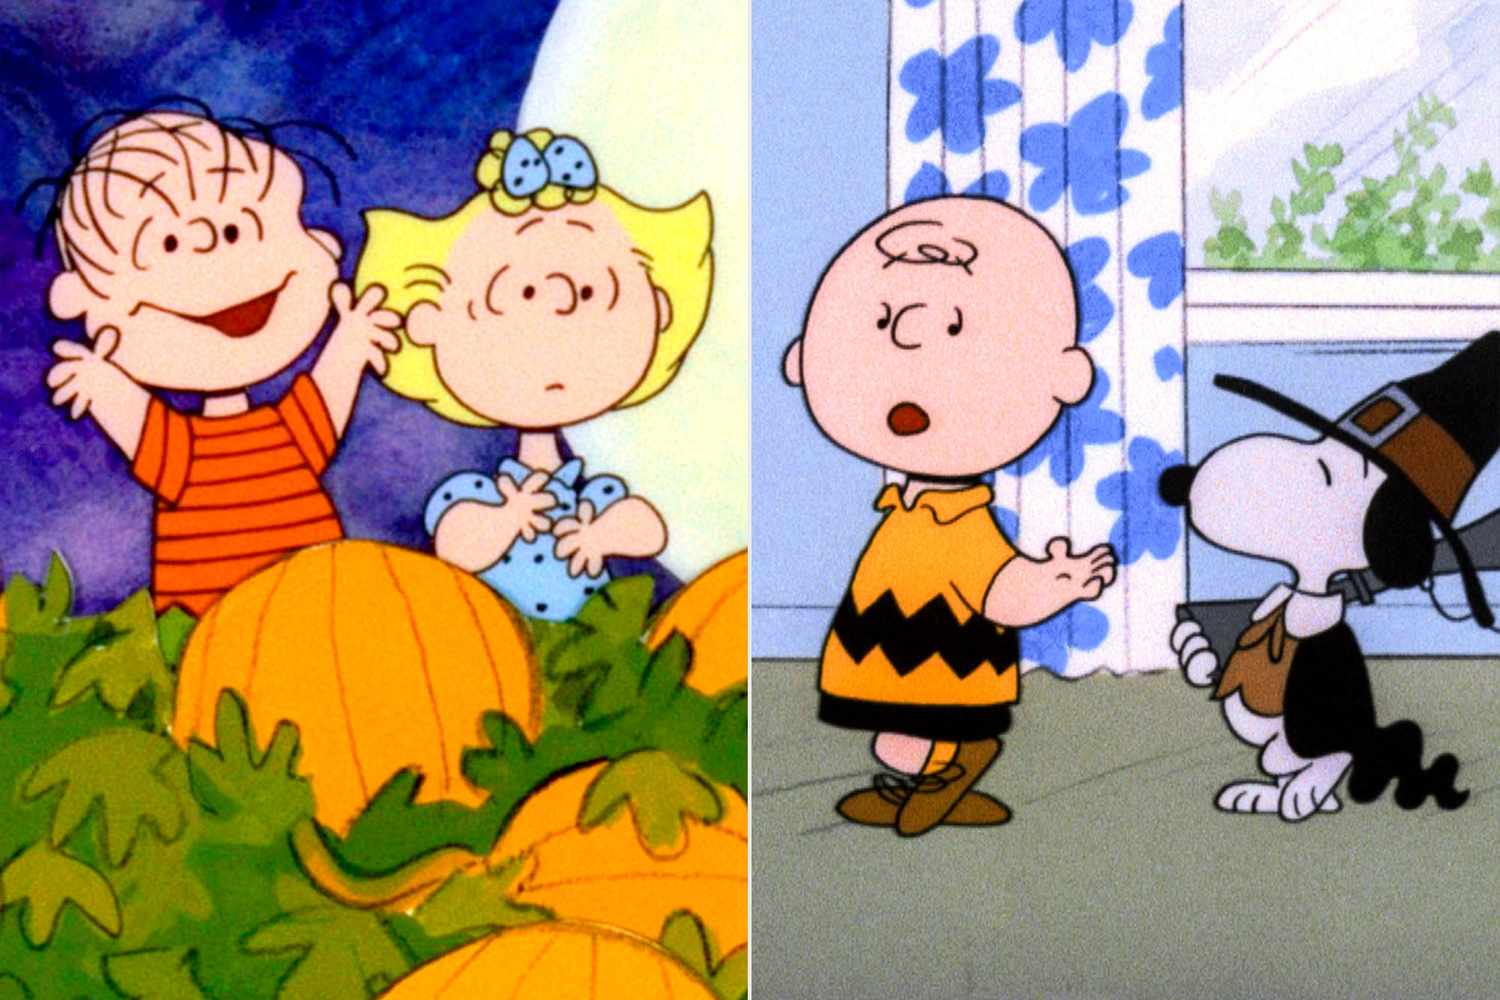 t's the Great Pumpkin Charlie Brown (1966) / A Charlie Brown Thanksgiving (1973)